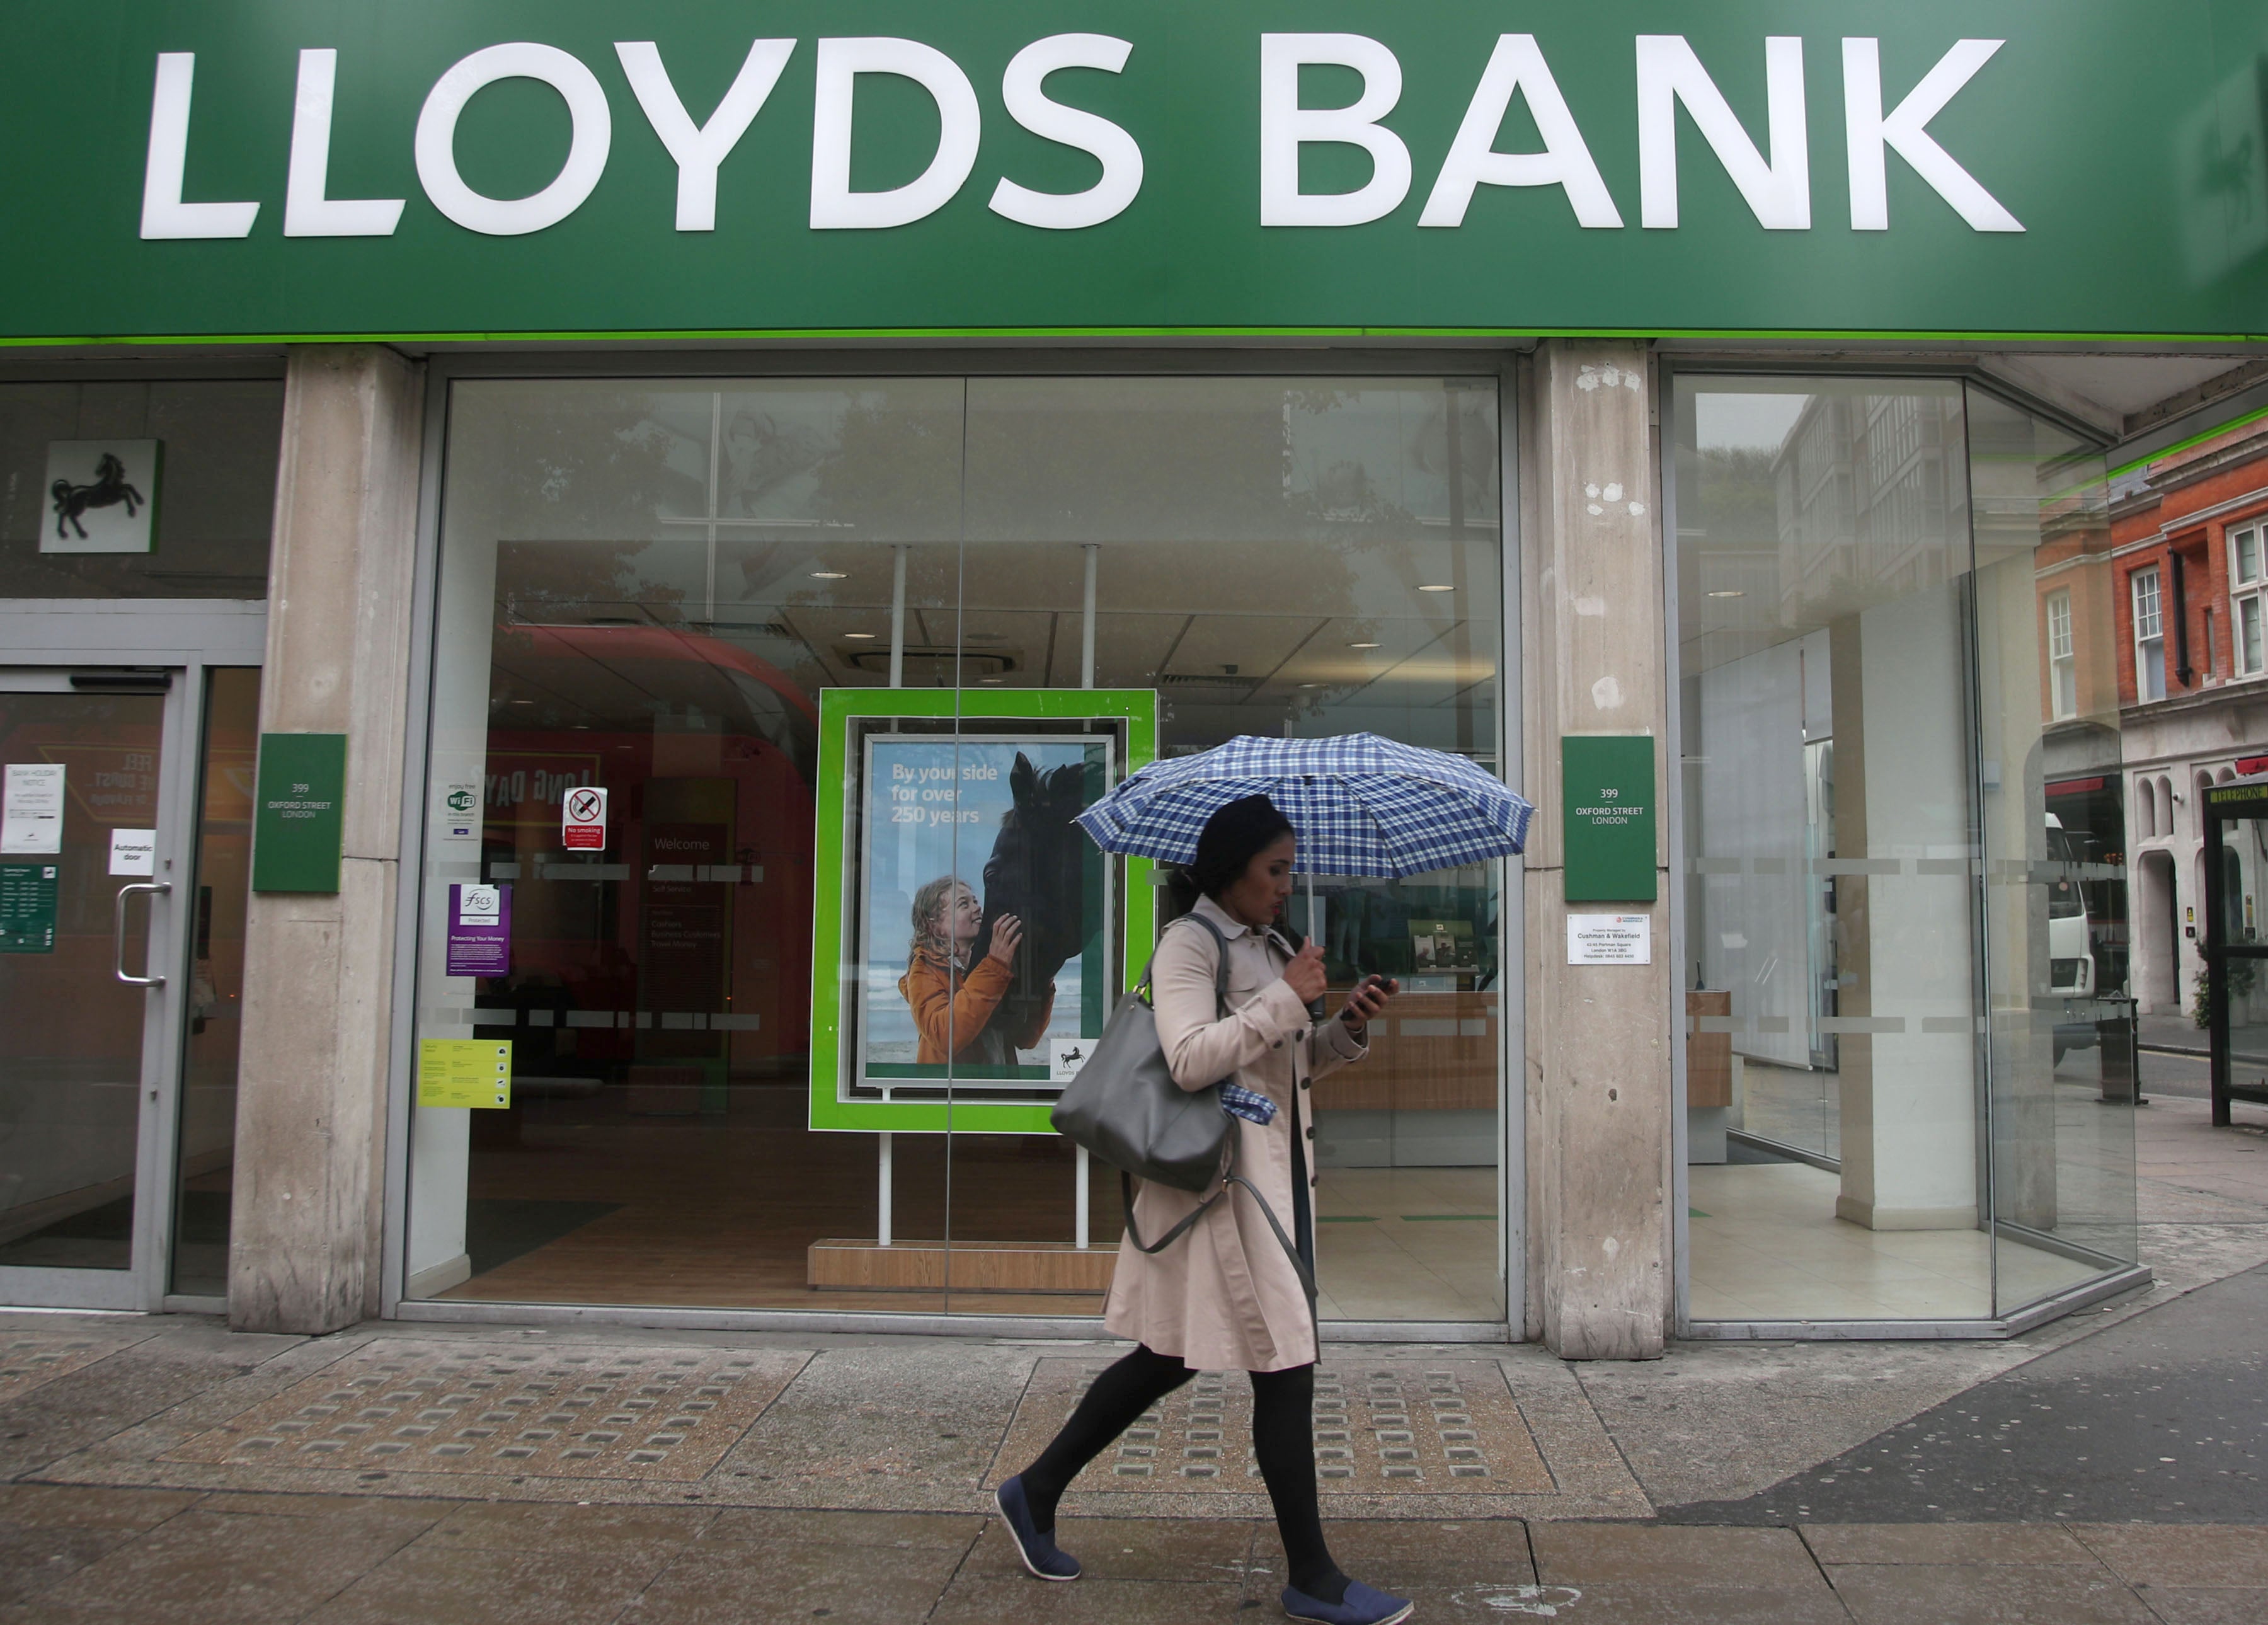 Lloyds is one of the banks reviewing their relationship with EU-based clients